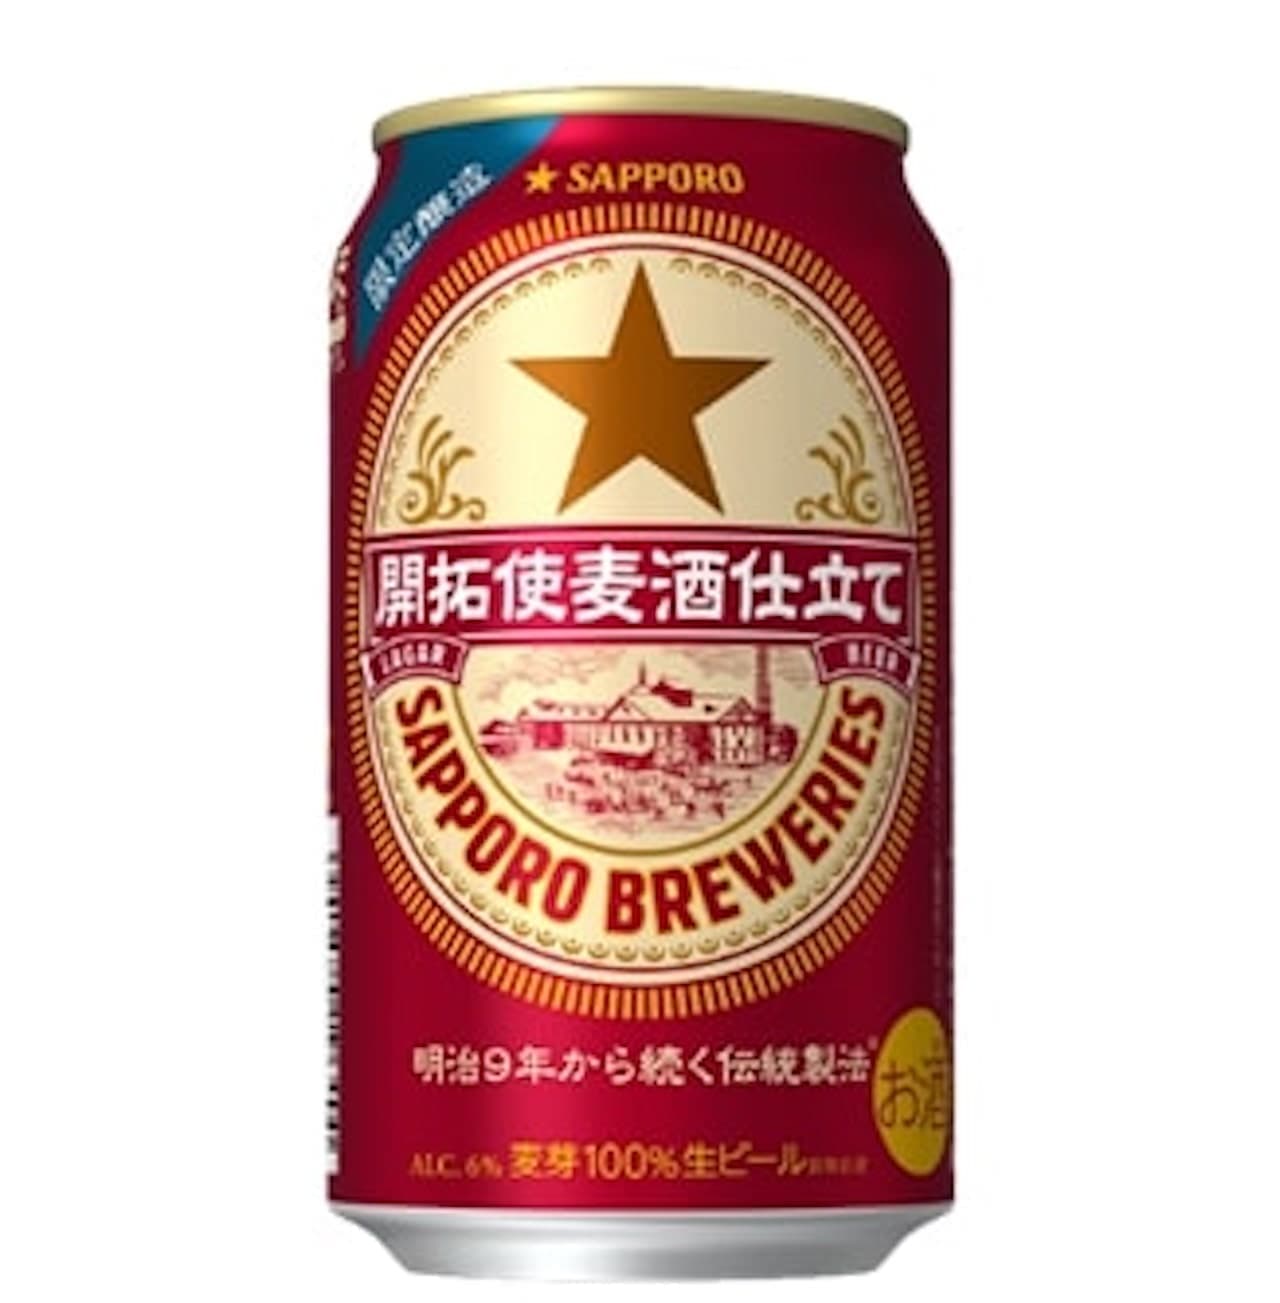 Cancellation of sales cancellation of "Sapporo Pioneer Brewery Tailoring"